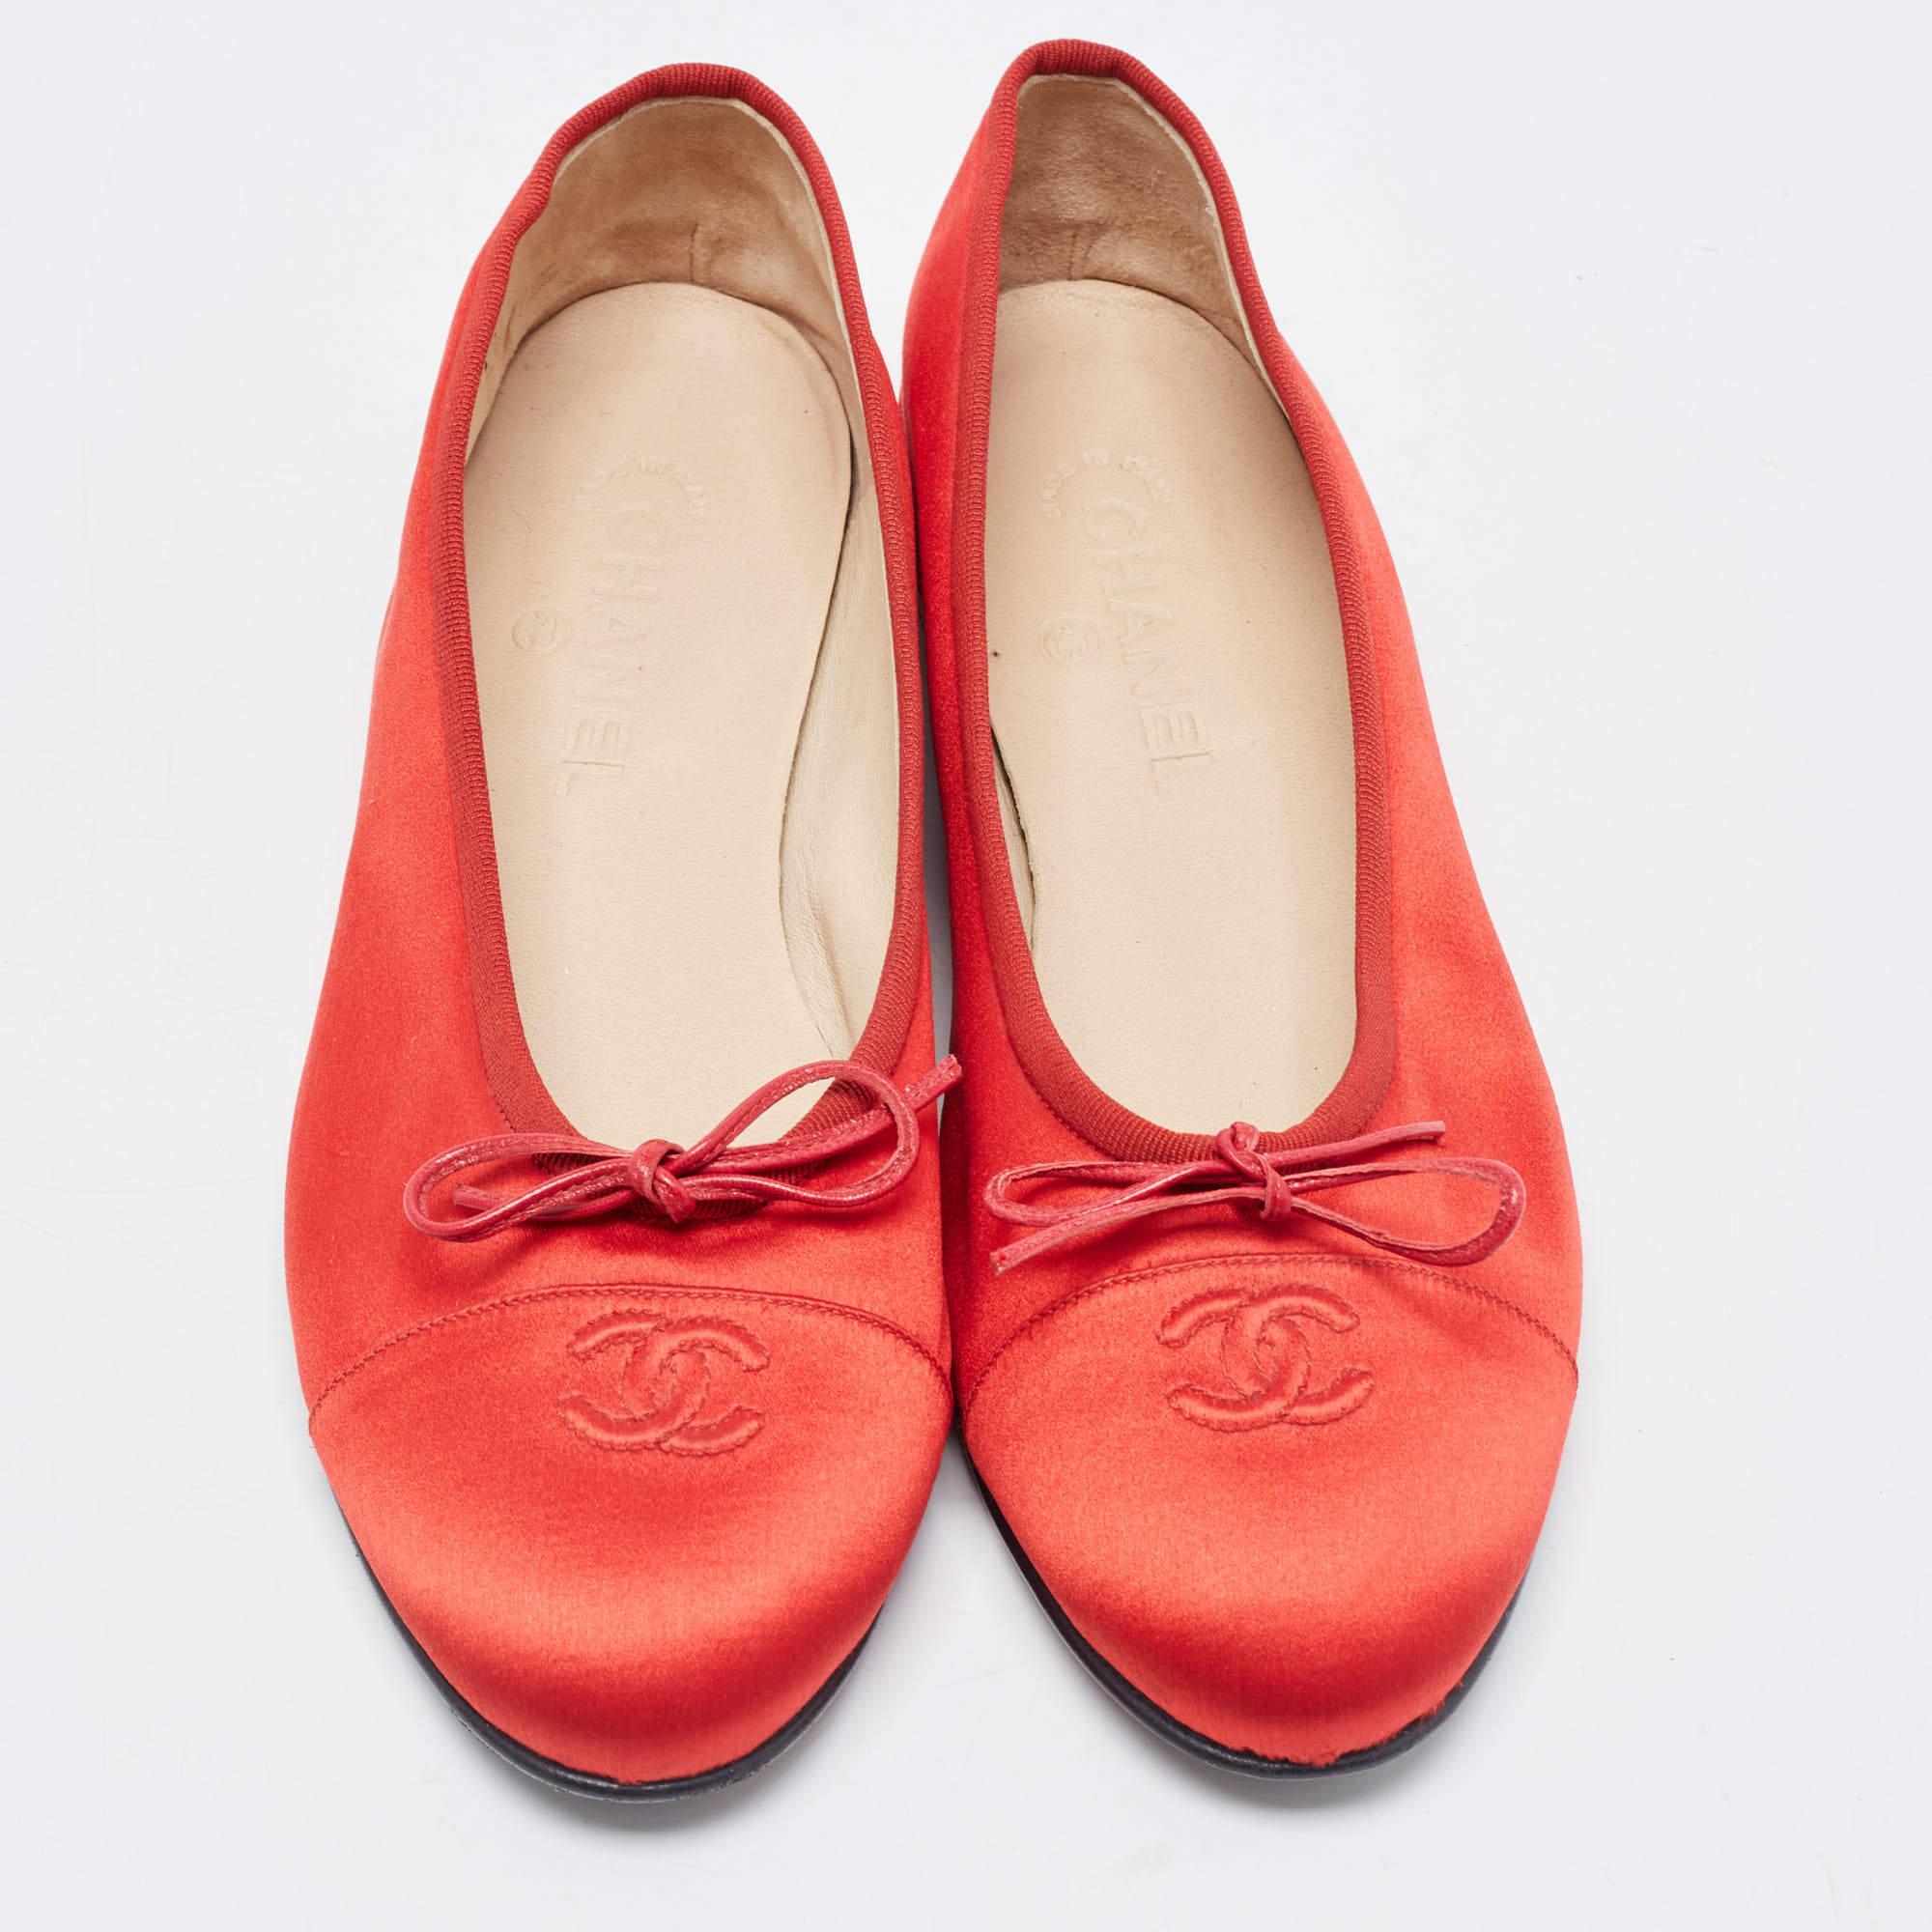 Red Chanel Ballet Flat - 3 For Sale on 1stDibs